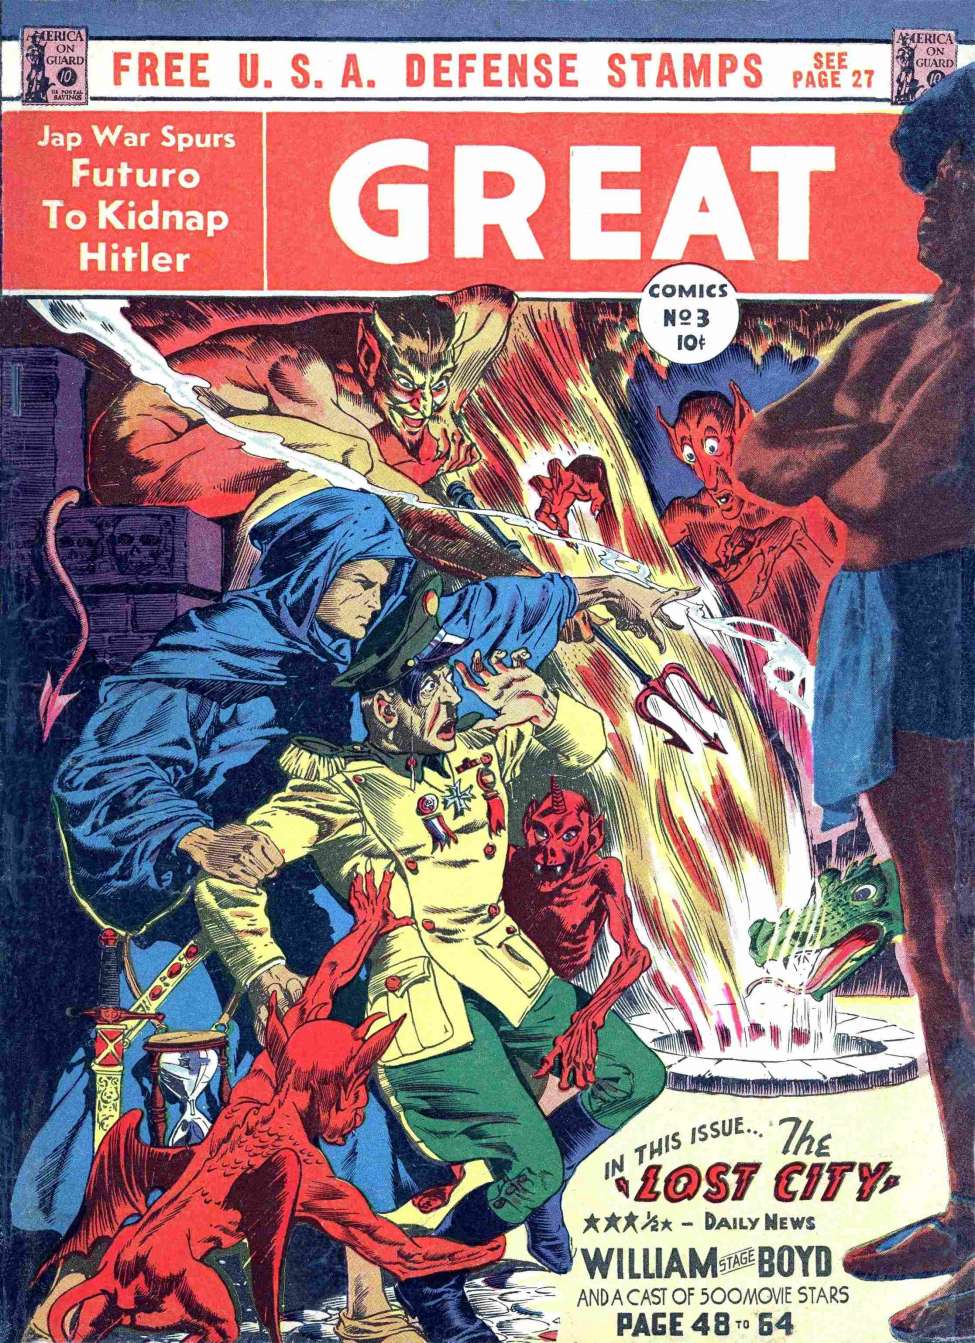 Book Cover For Great Comics 3 - Version 1